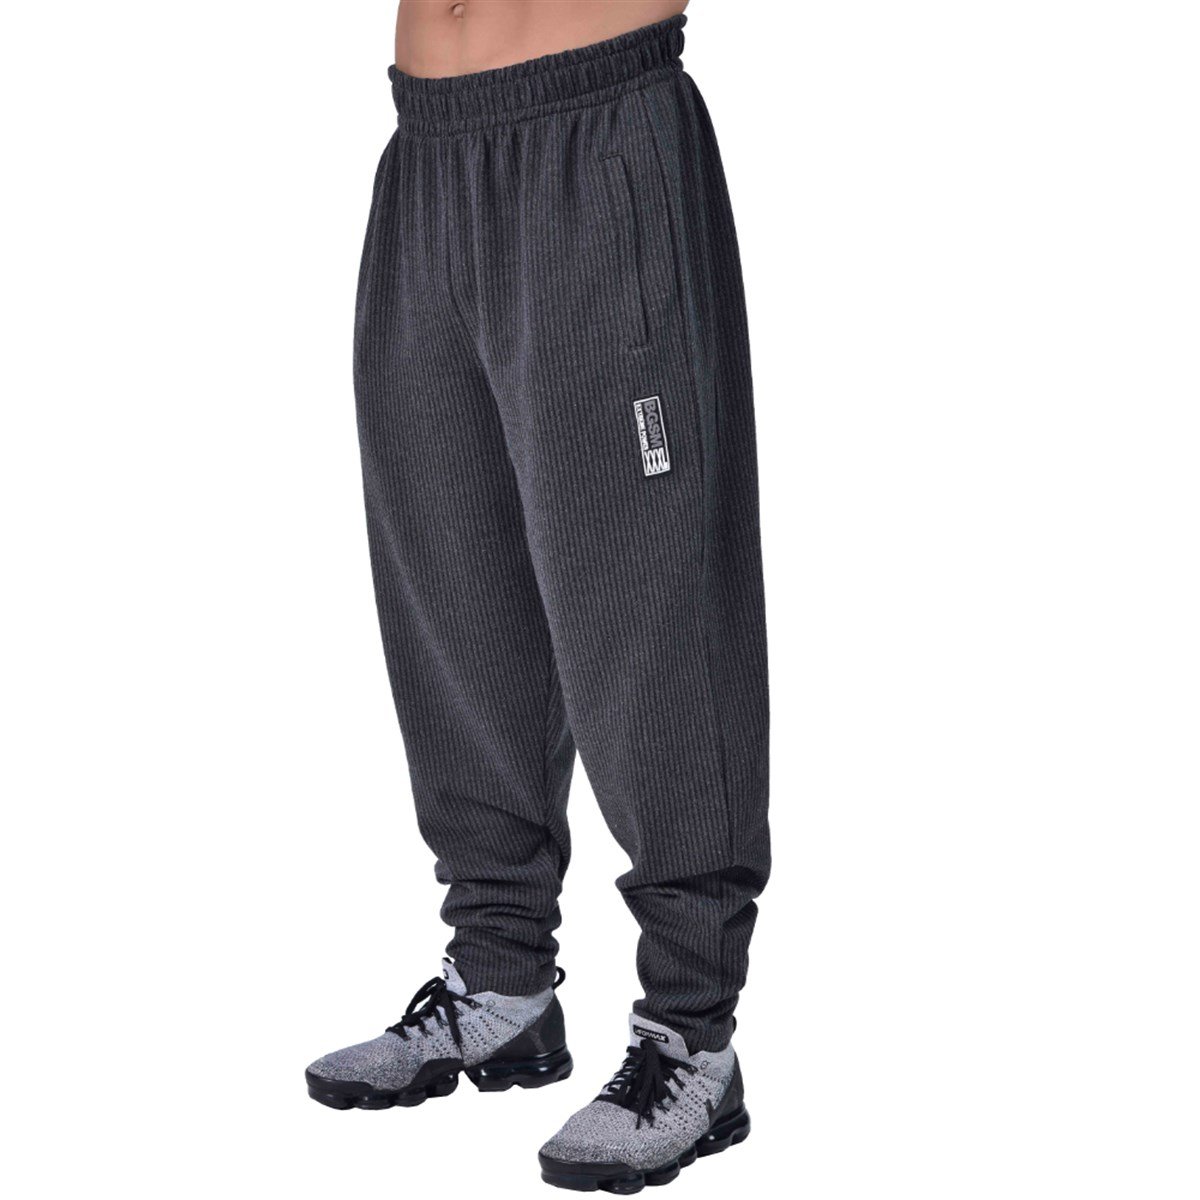  BIG SAM SPORTSWEAR COMPANY Men's Baggy Sweatpants with Pockets,  Oldschool Loose Fit Gym Pants (Grey, S) : Clothing, Shoes & Jewelry